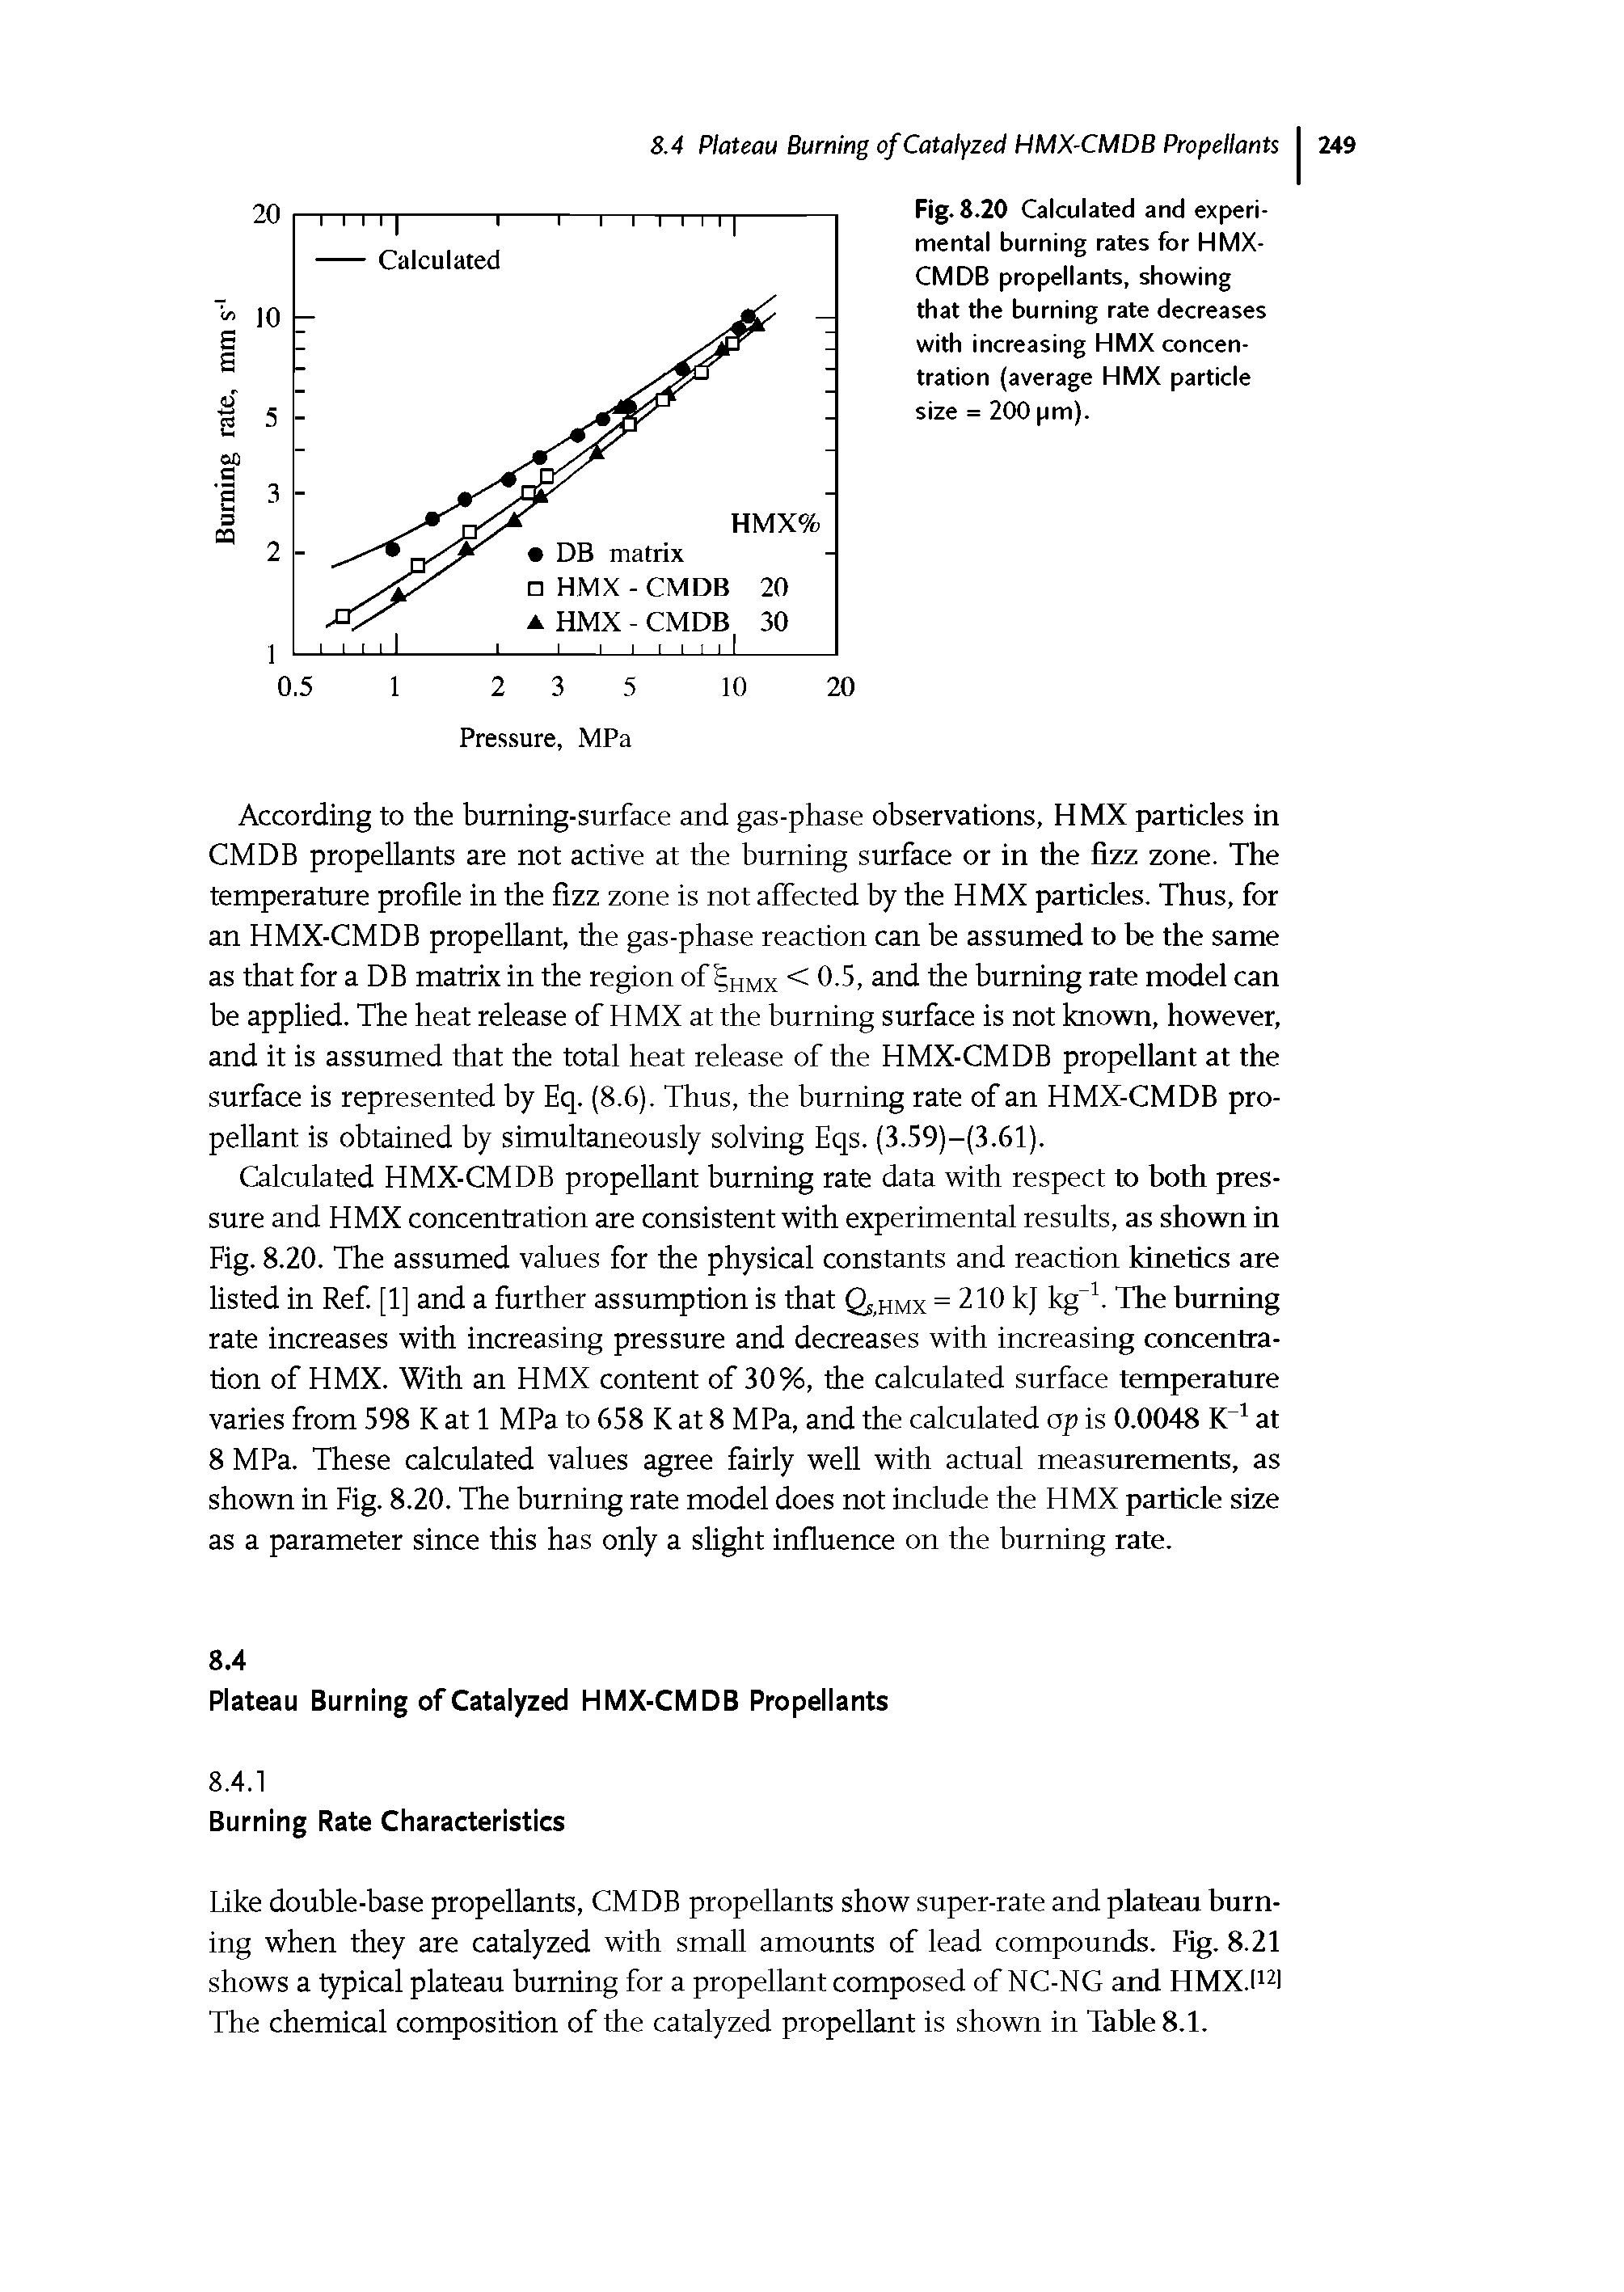 Fig. 8.20 Calculated and experimental burning rates for HMX-CMDB propellants, showing that the burning rate decreases with increasing HMX concentration (average HMX particle size = 200 pm).